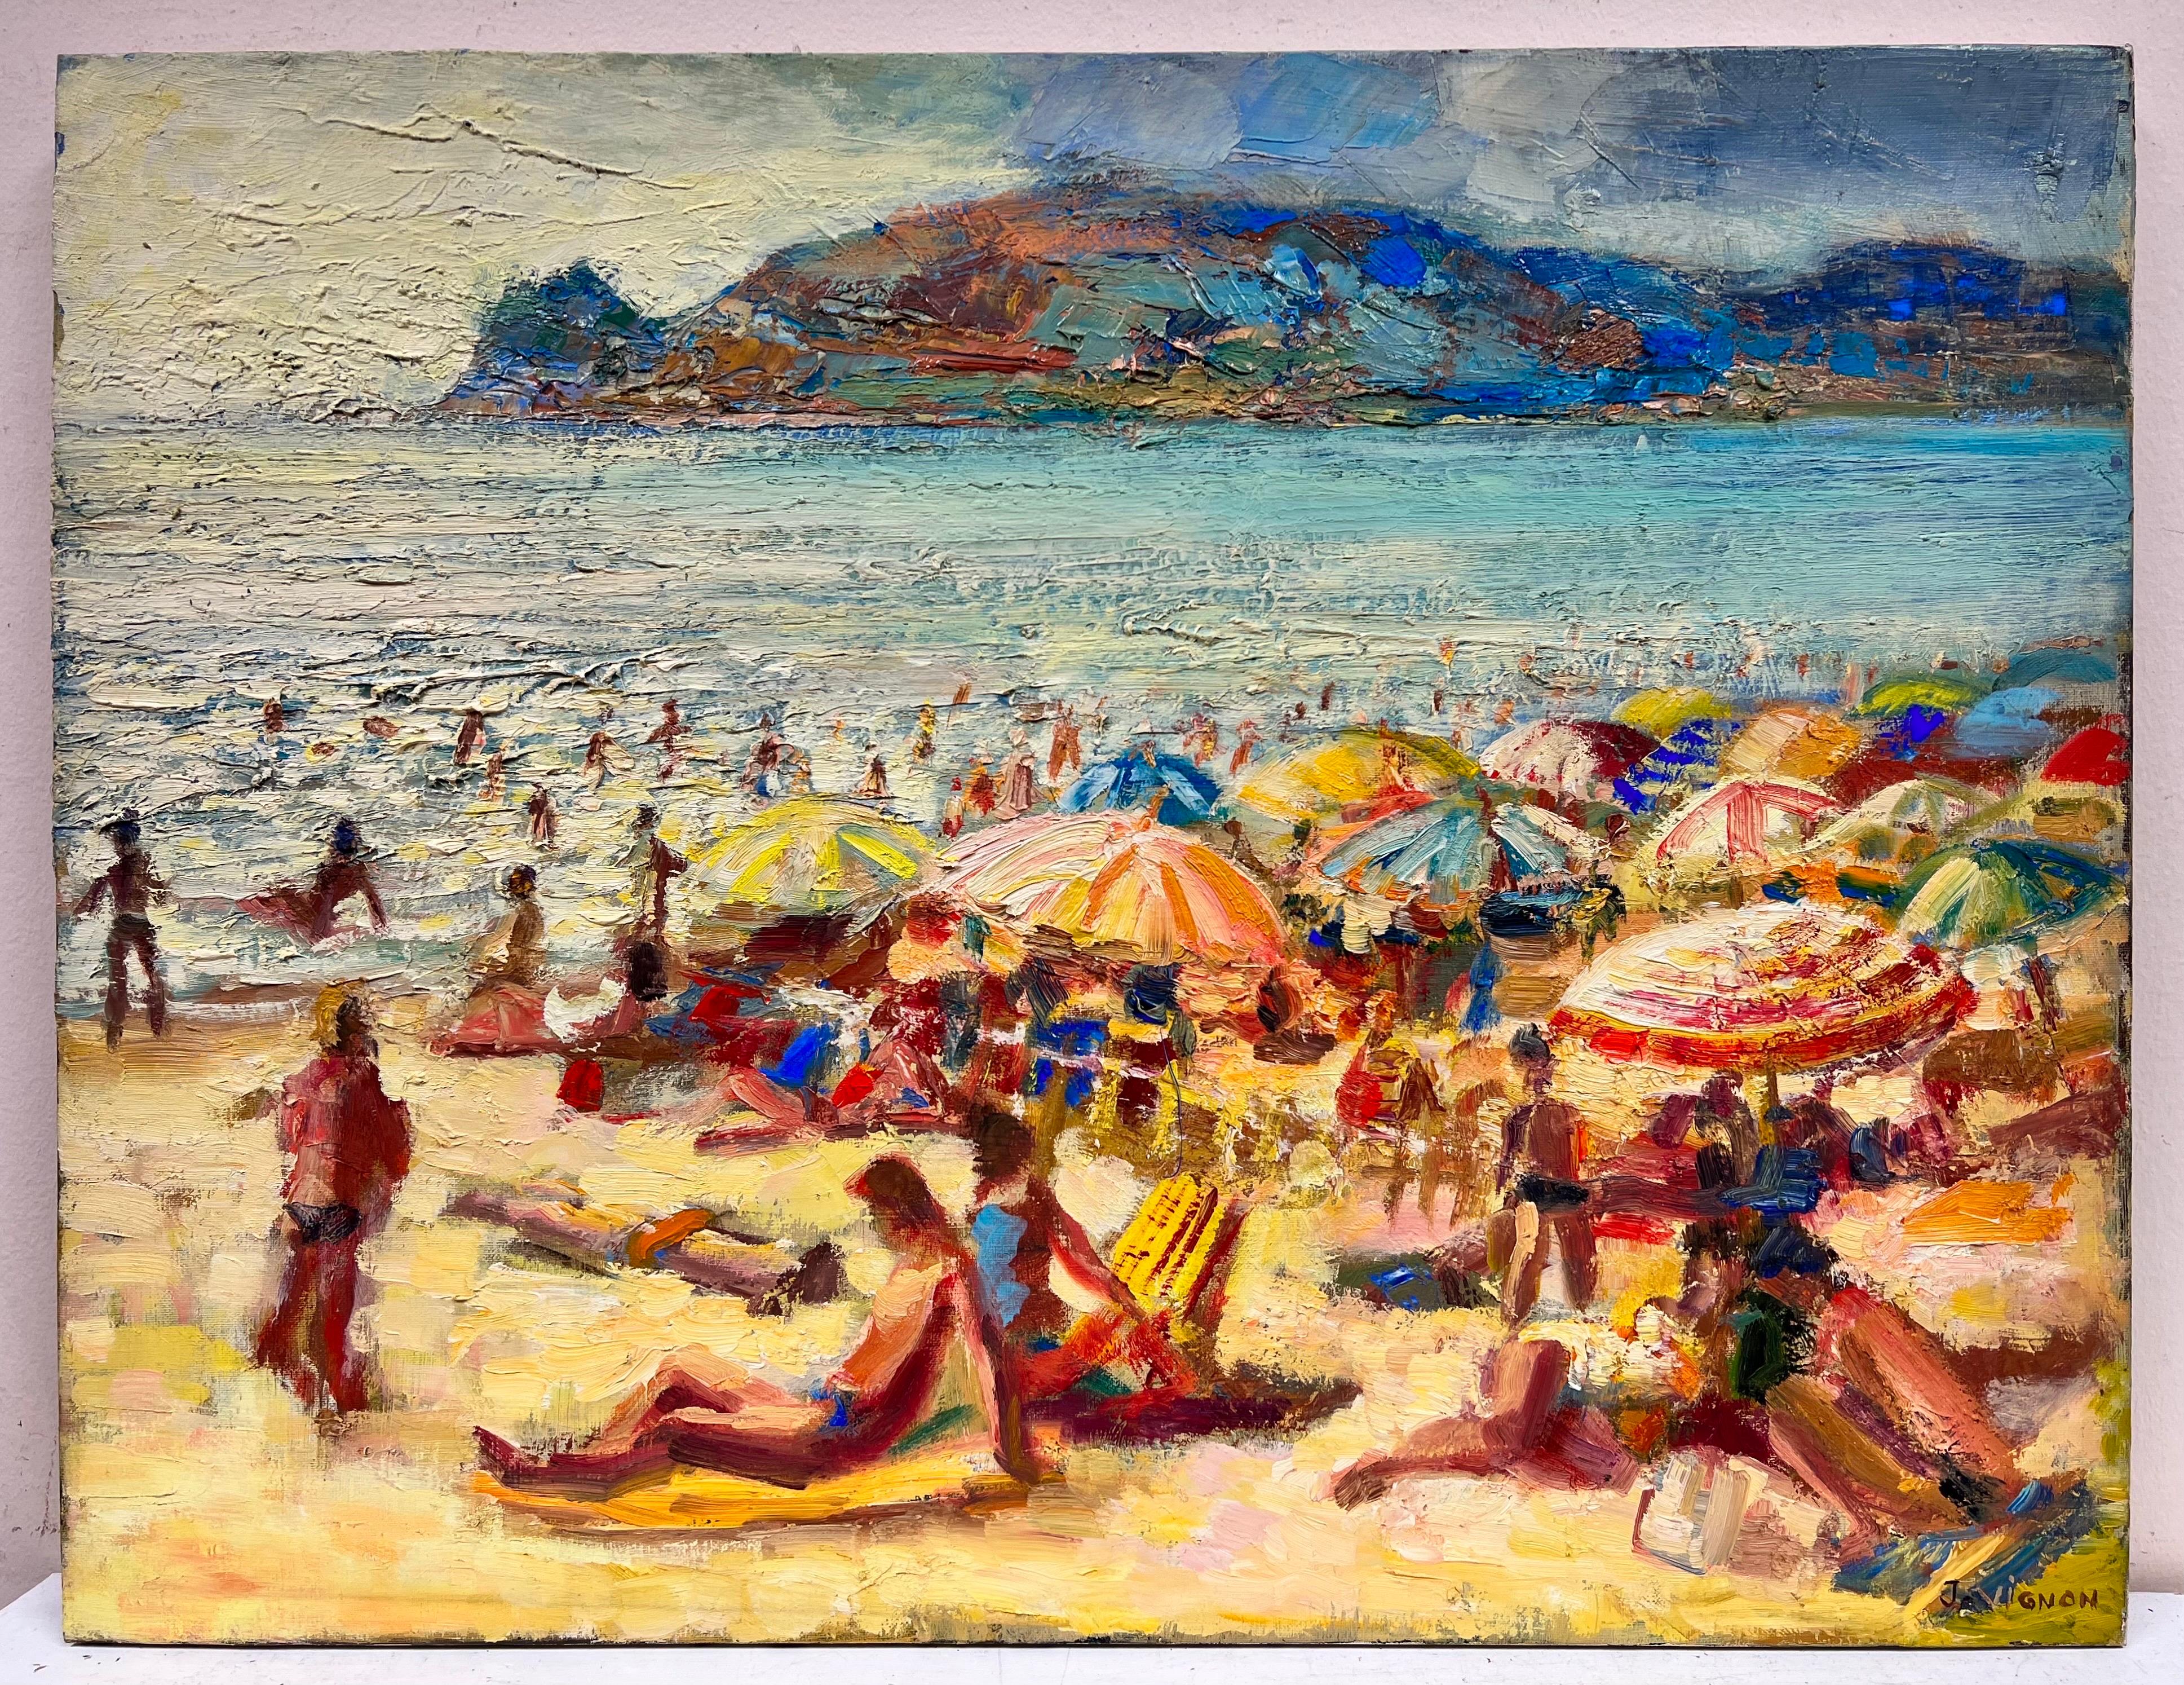 20th French Post Impressionist Oil Busy Summer Beach Scene Many Figures & Color - Painting by Josine Vignon